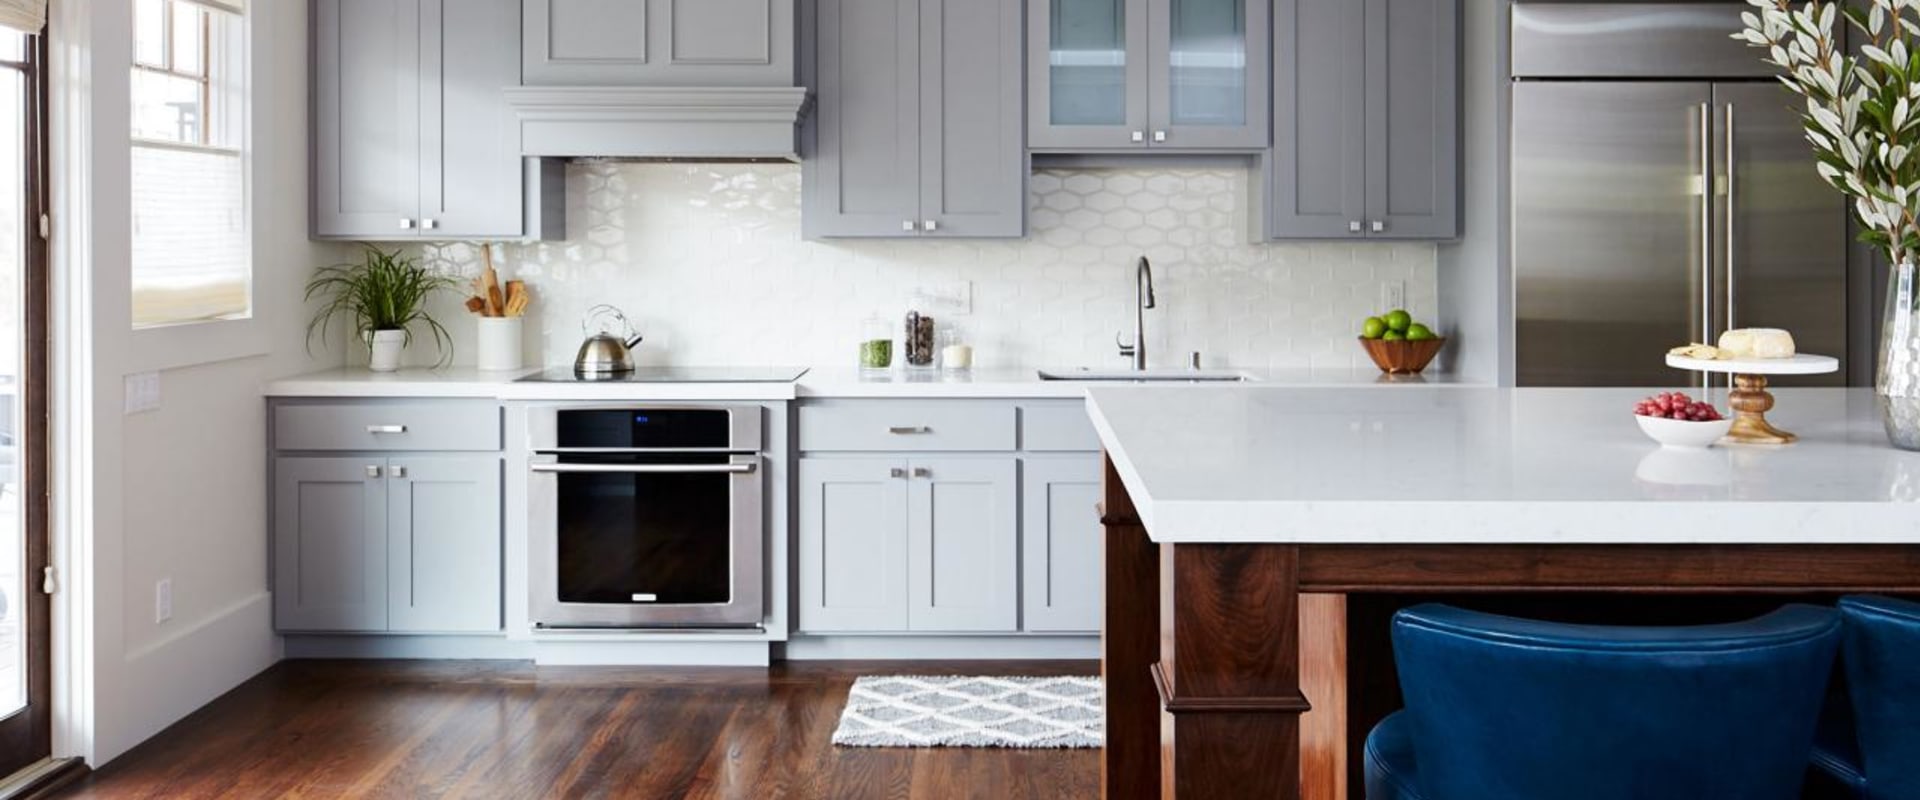 Can kitchen cabinets be painted?